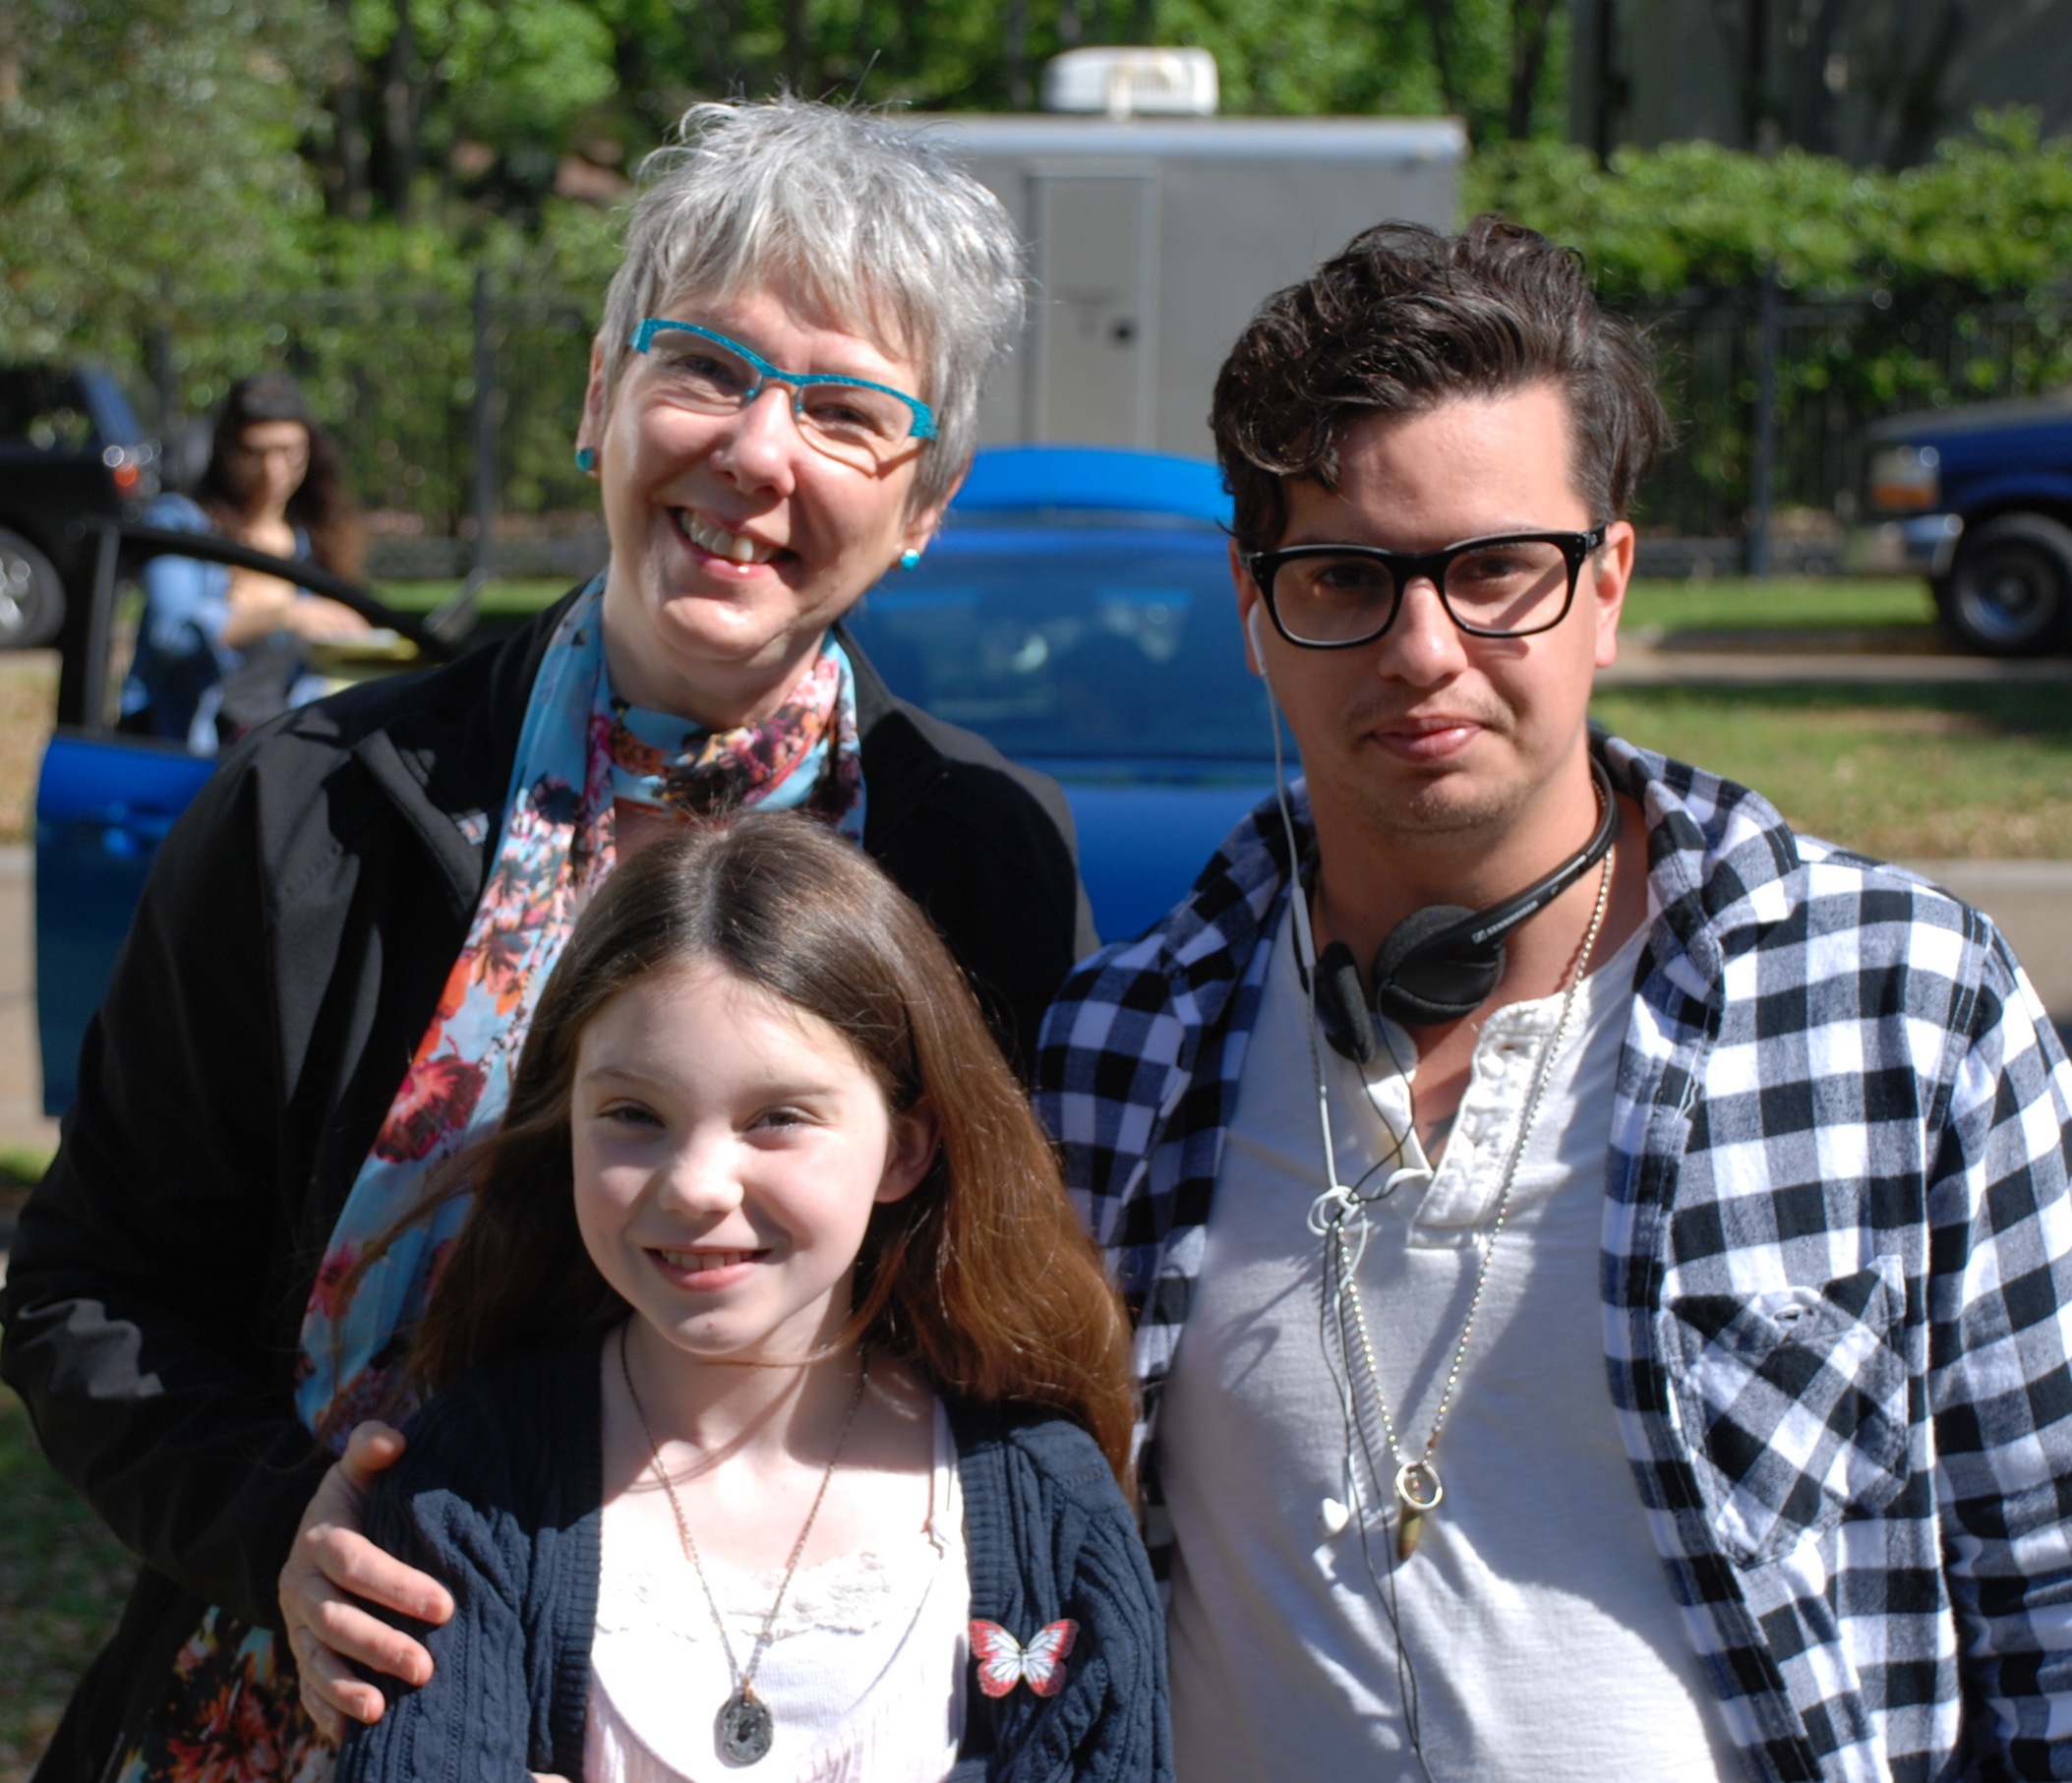 Sharon Y. Cobb, writer; L. Gustavo Cooper, writer/director and star Kennedy Brice on the set of June.